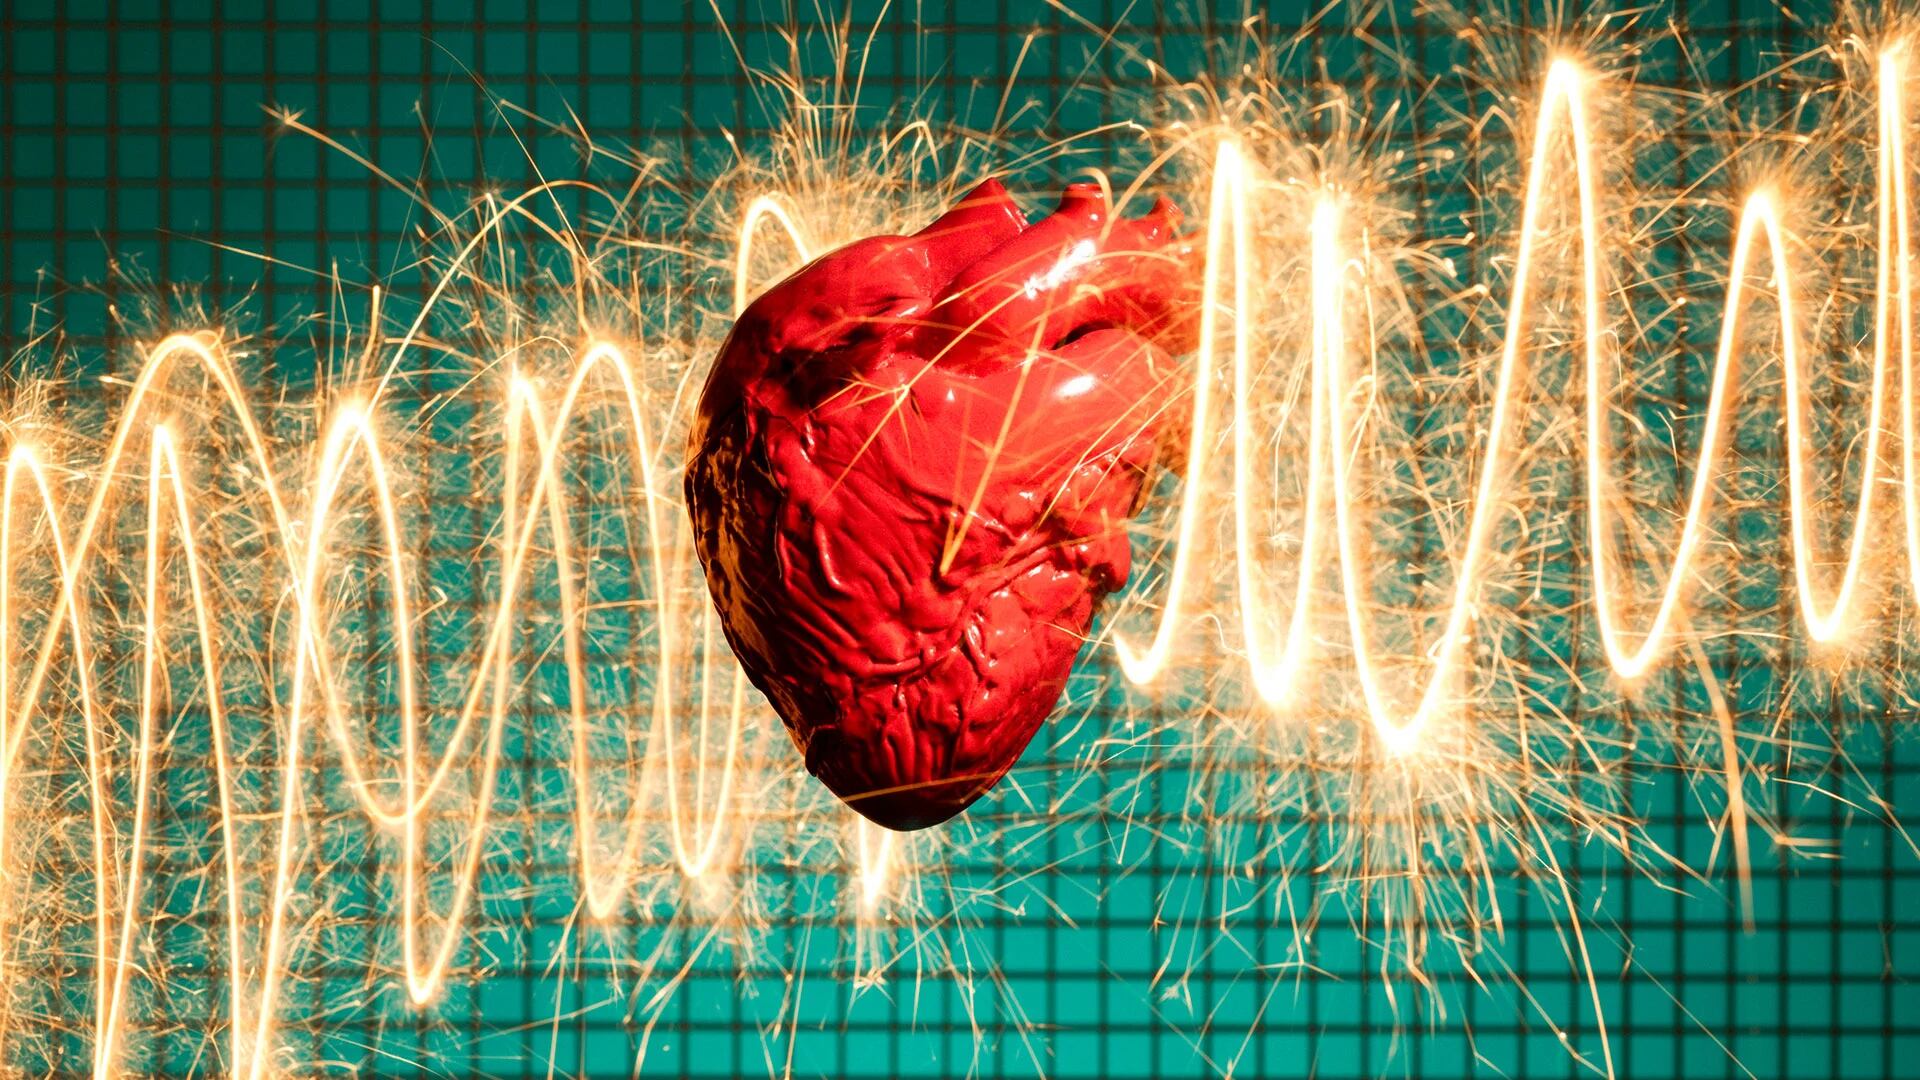 Model of human heart in front of wave pattern of sparks on green grid patterned background (Getty)